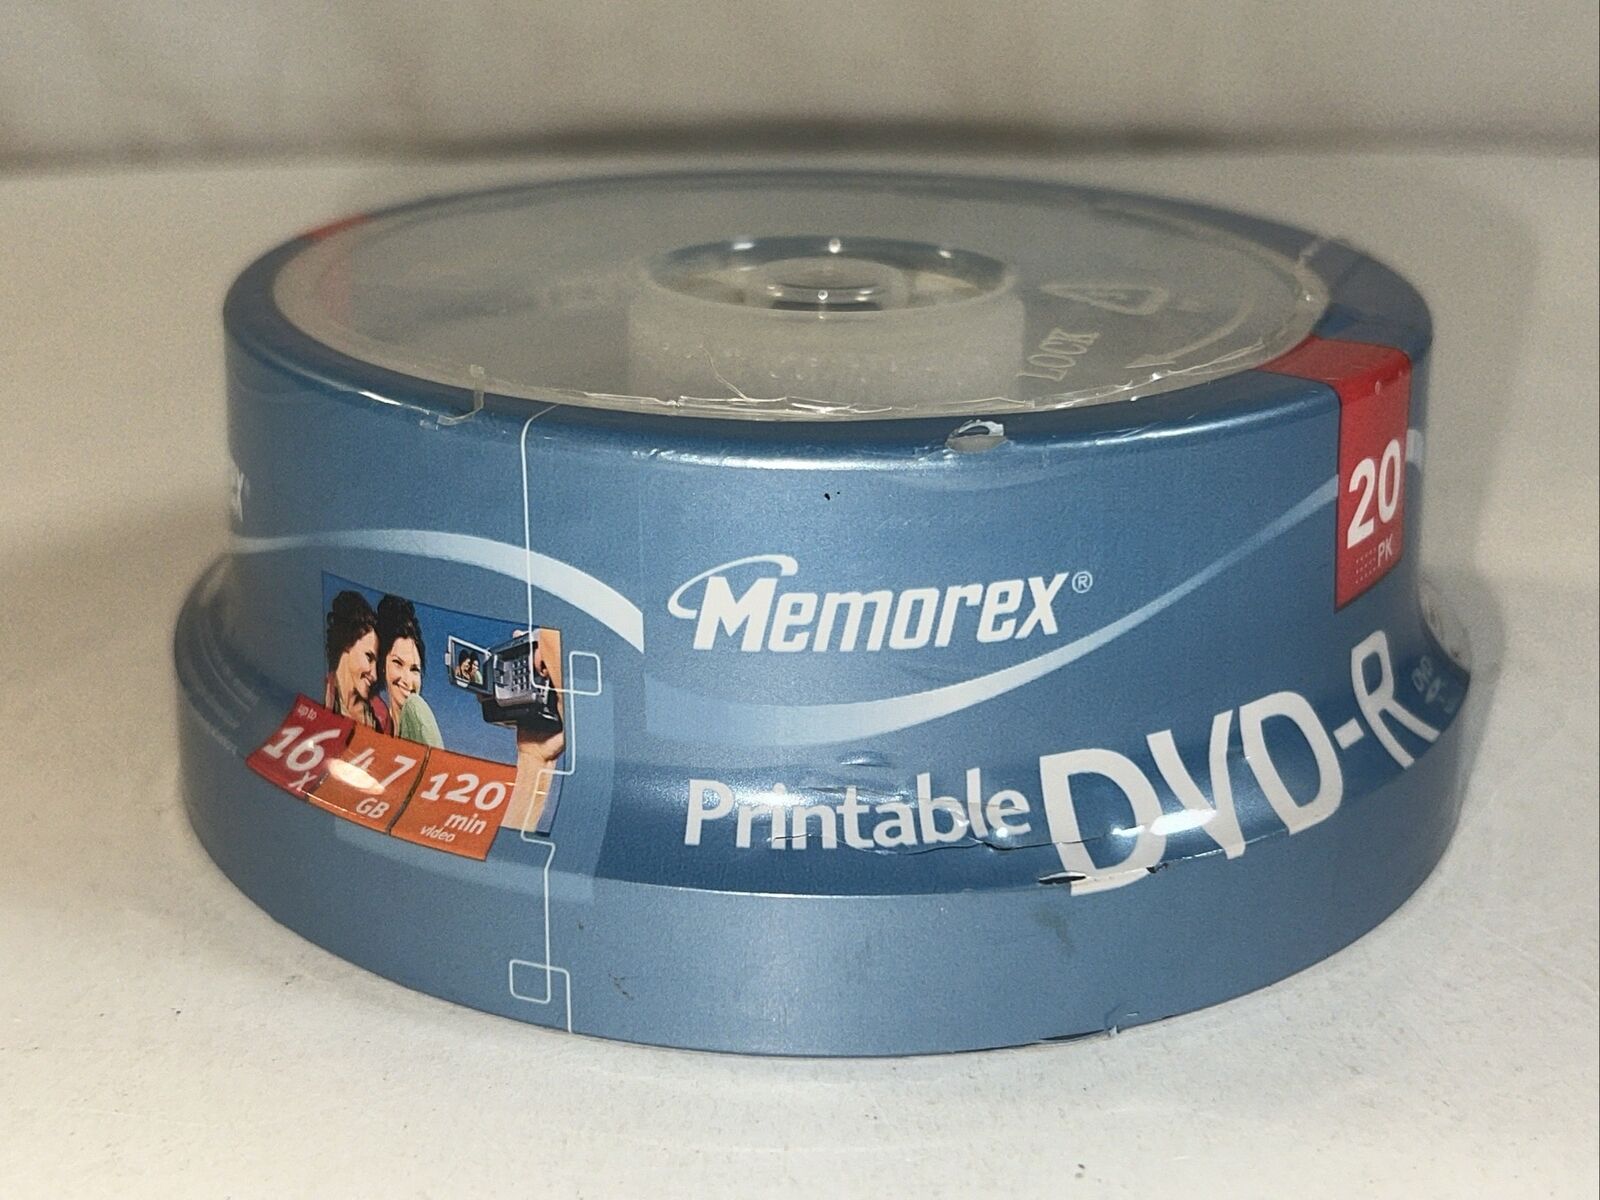 Memorex Printable Recordable DVD+R  16x 120 minute 4.7 GB Spindle 20 Pack New